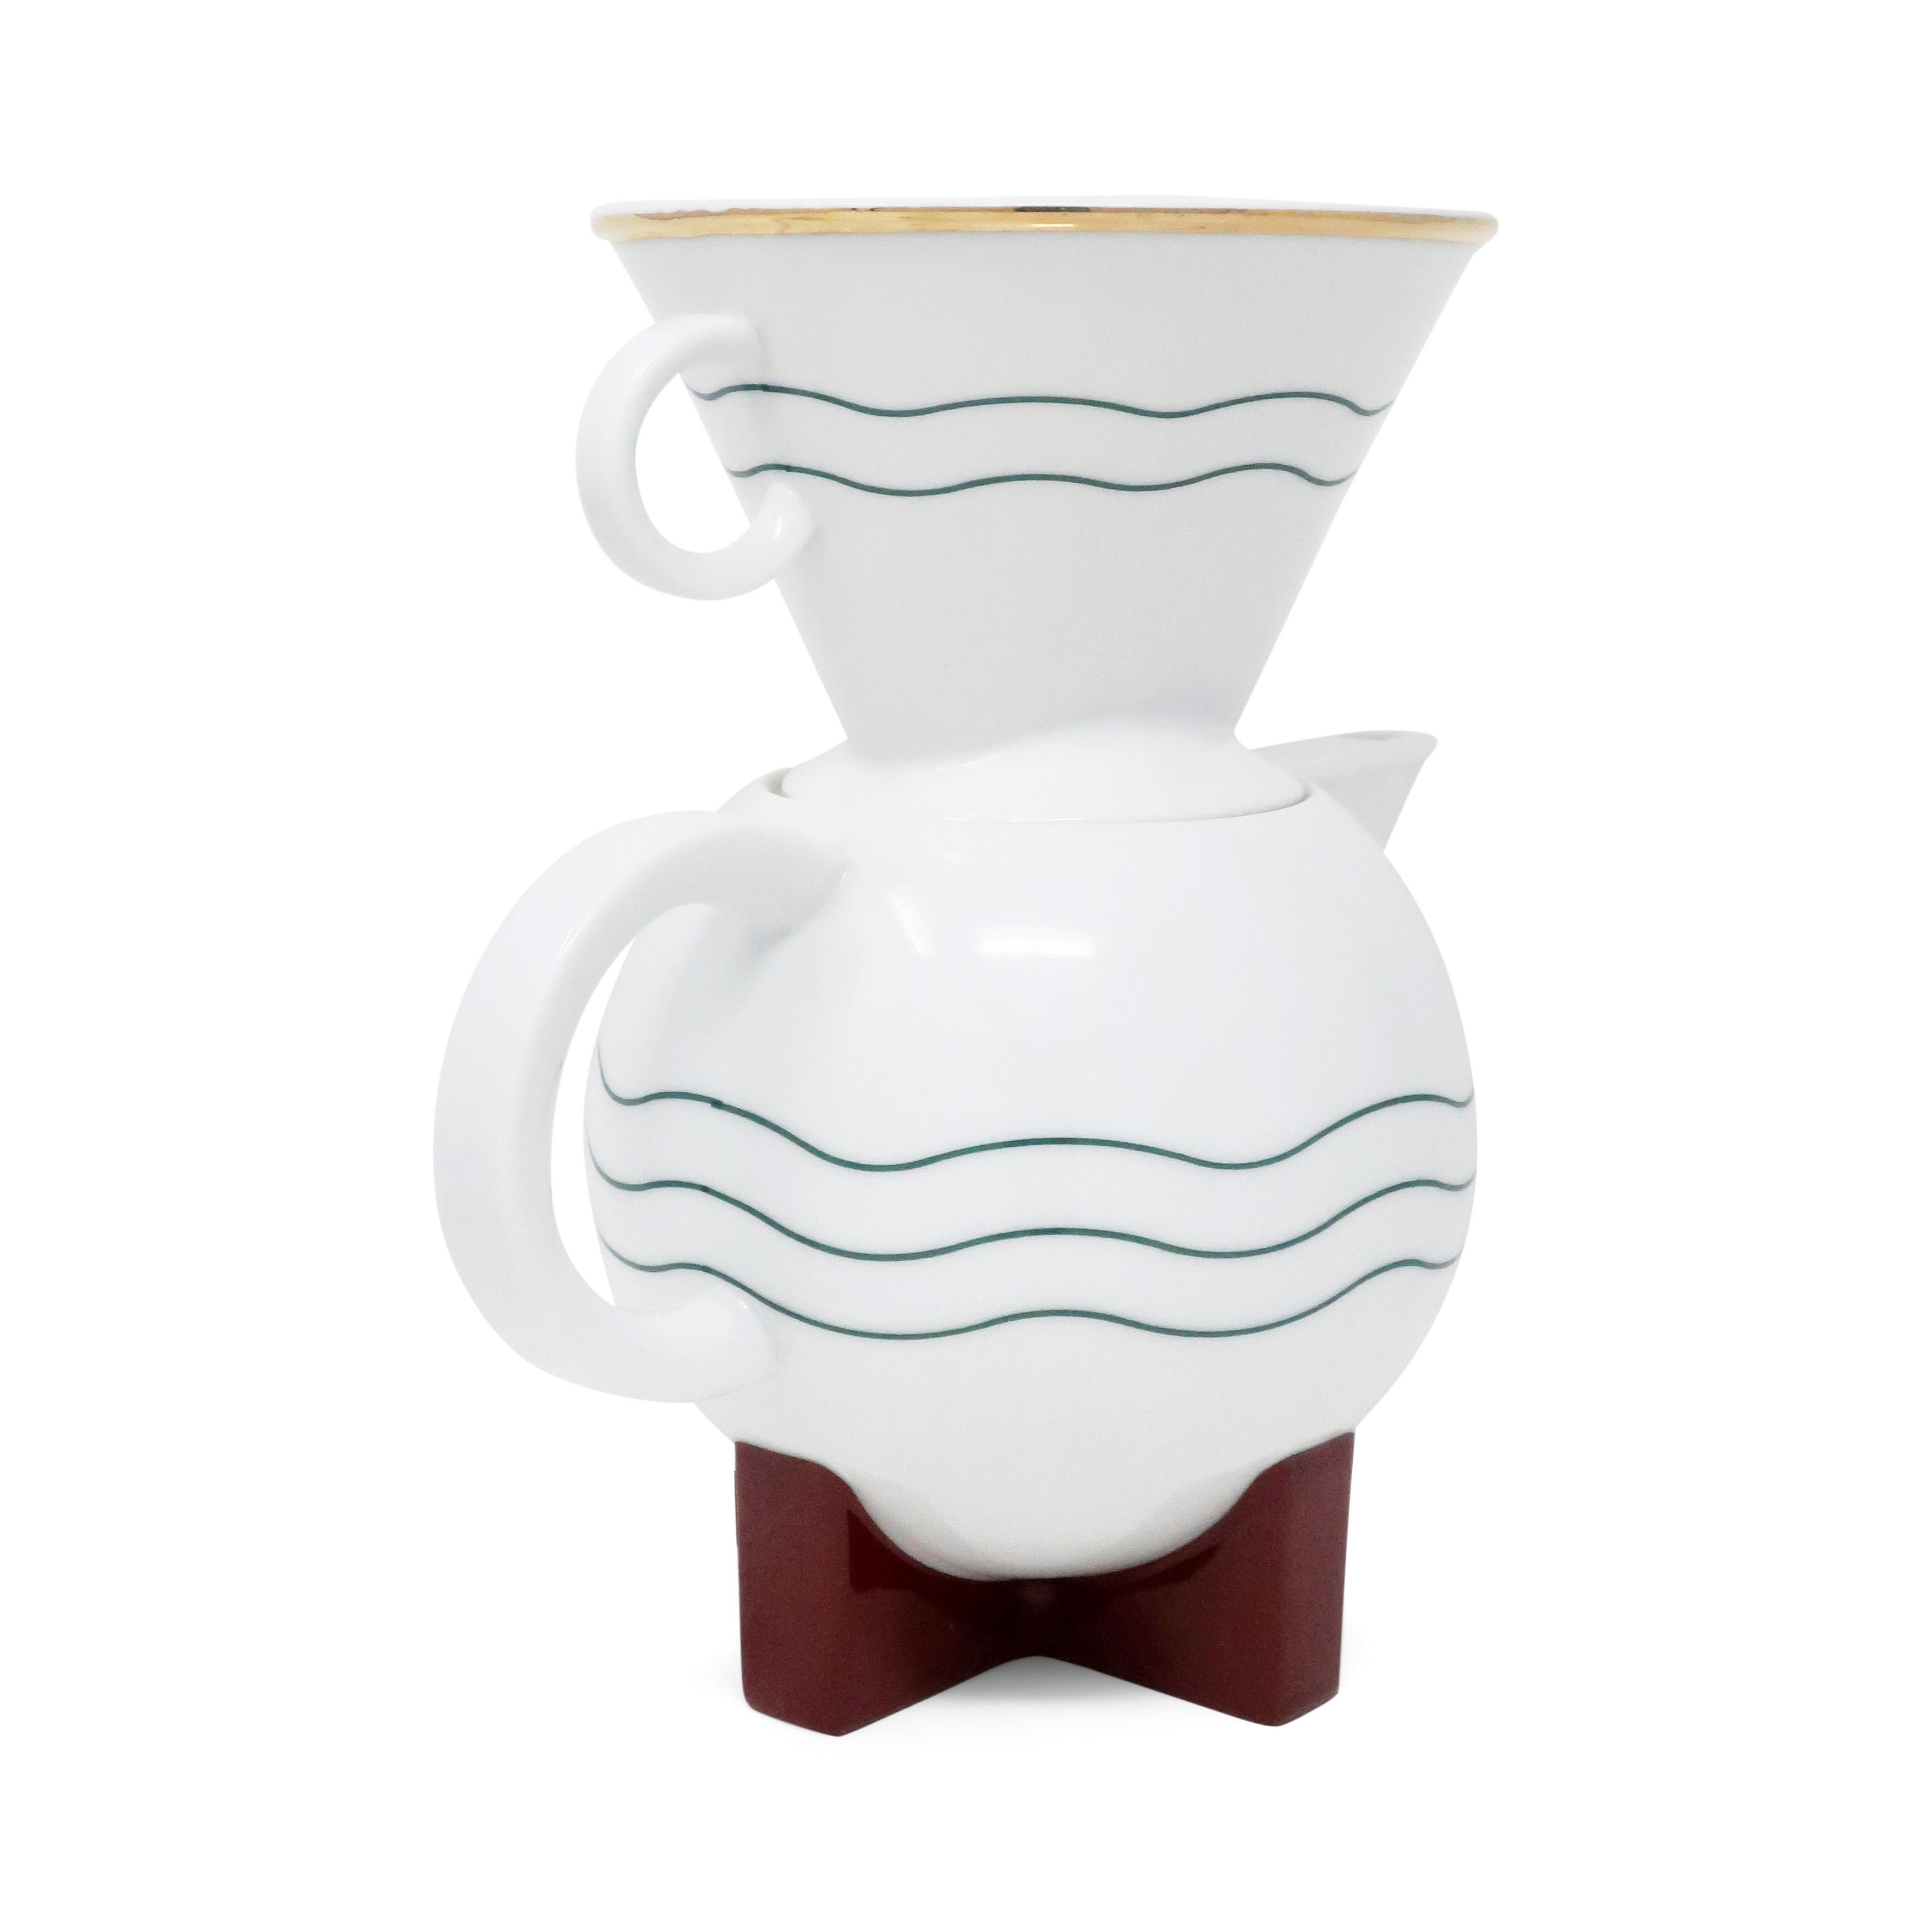 Post-Modern Little Dripper Ceramic Coffee Pot by Michael Graves for Swid Powell